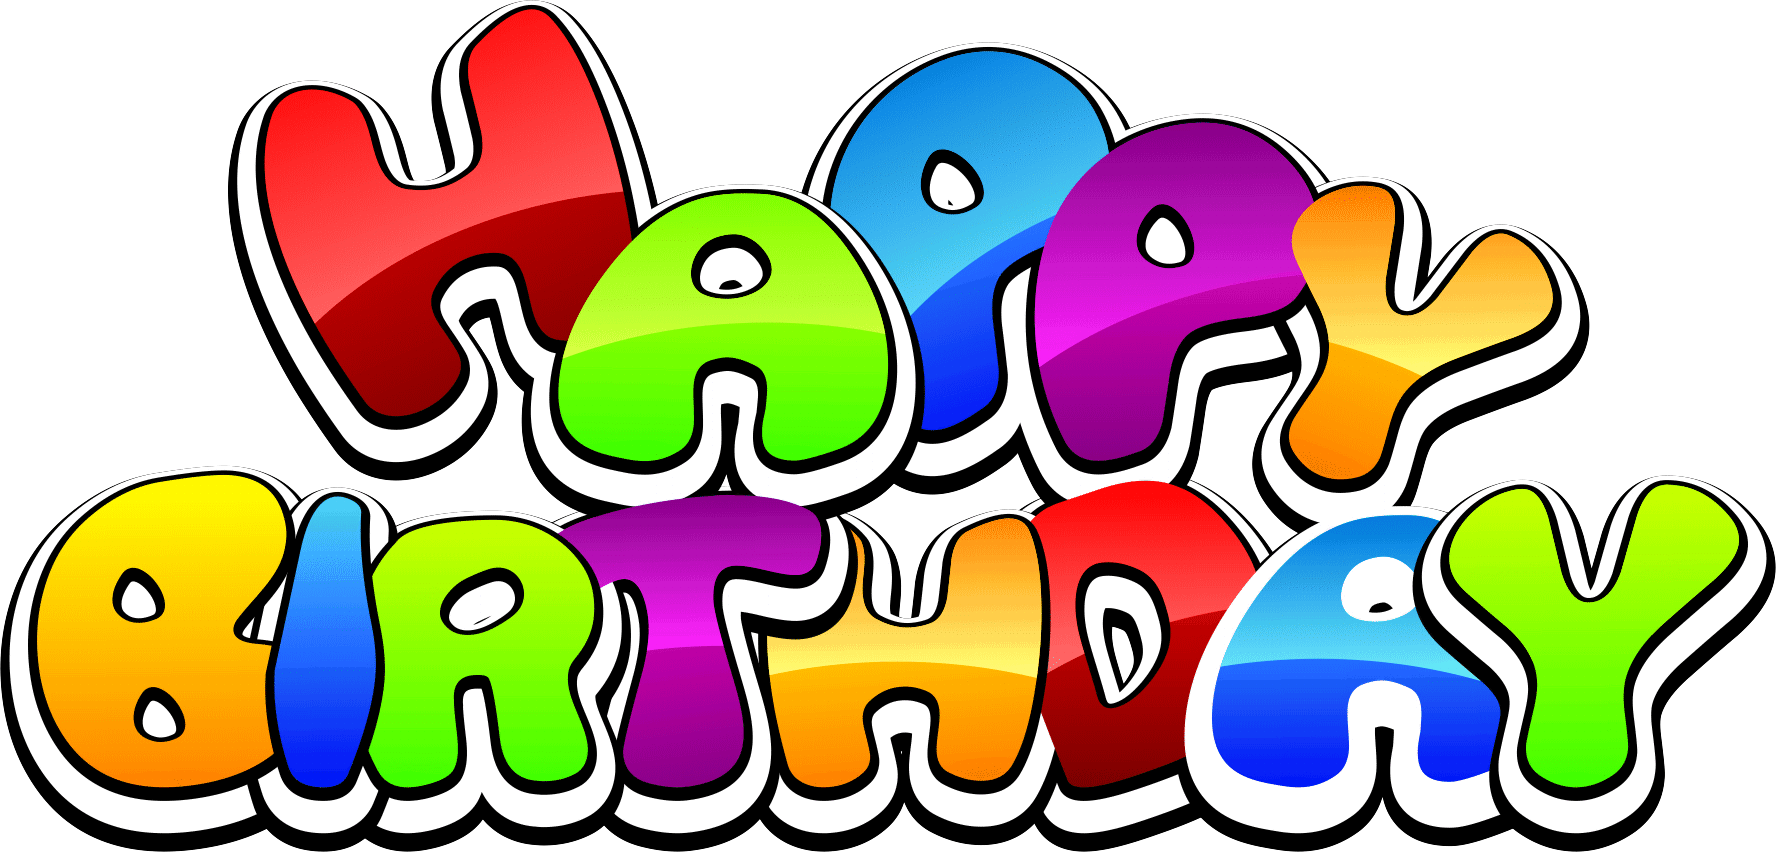 by Debbie Adams on Happy Birthday Text - ClipArt Best - ClipArt Best